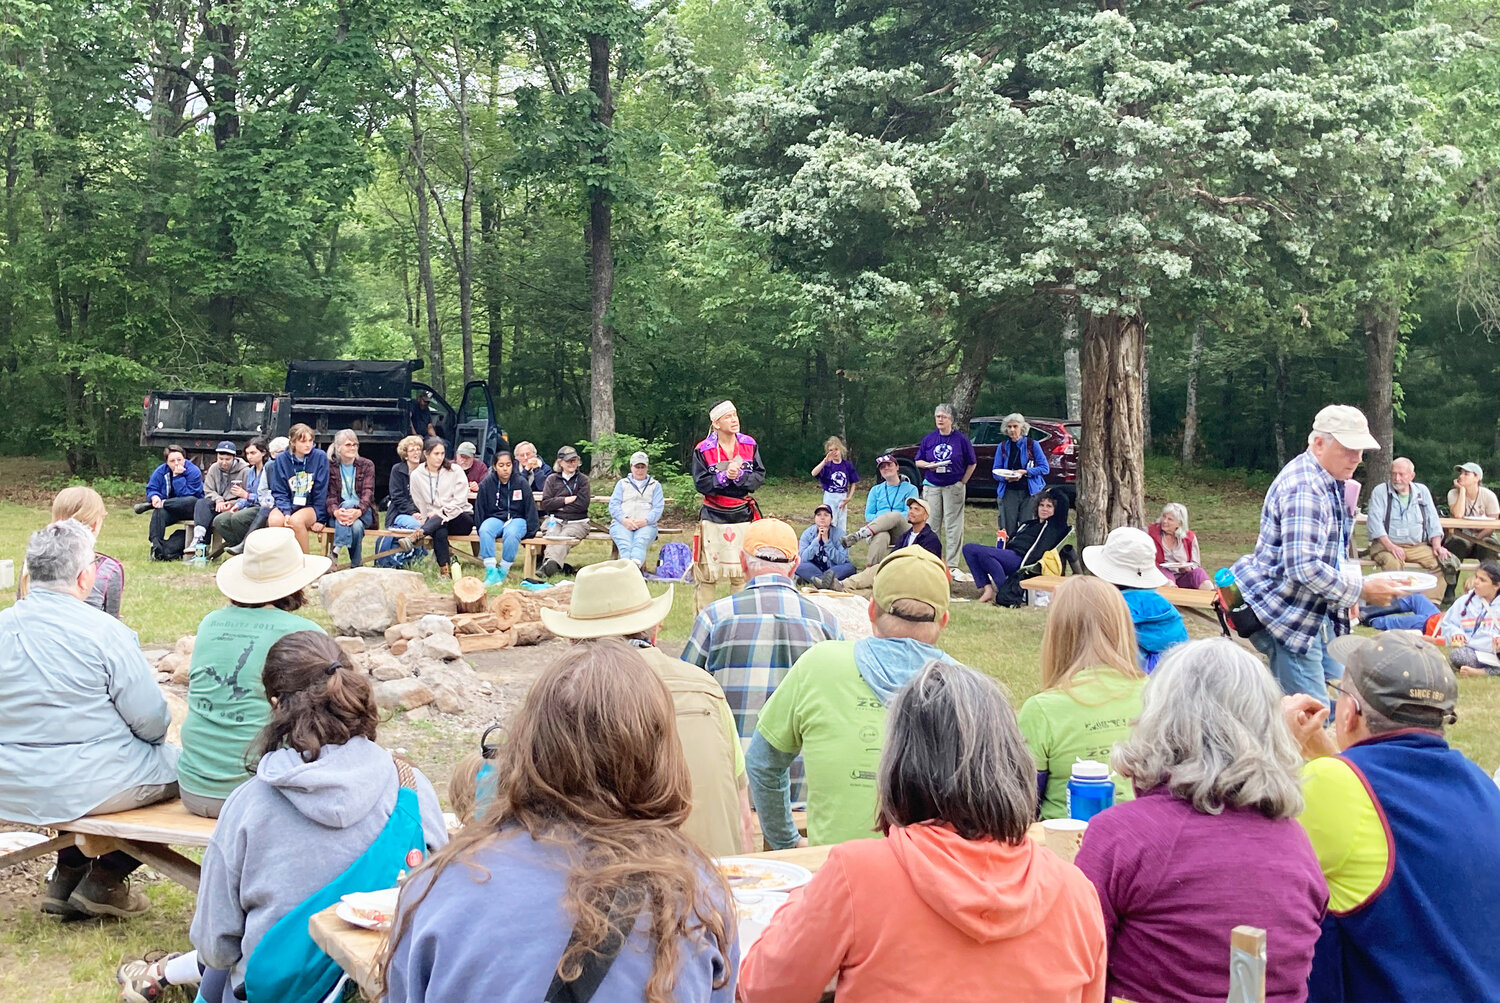 Narragansett Tribal Member Thawn Harris shares traditional stories over the campfire